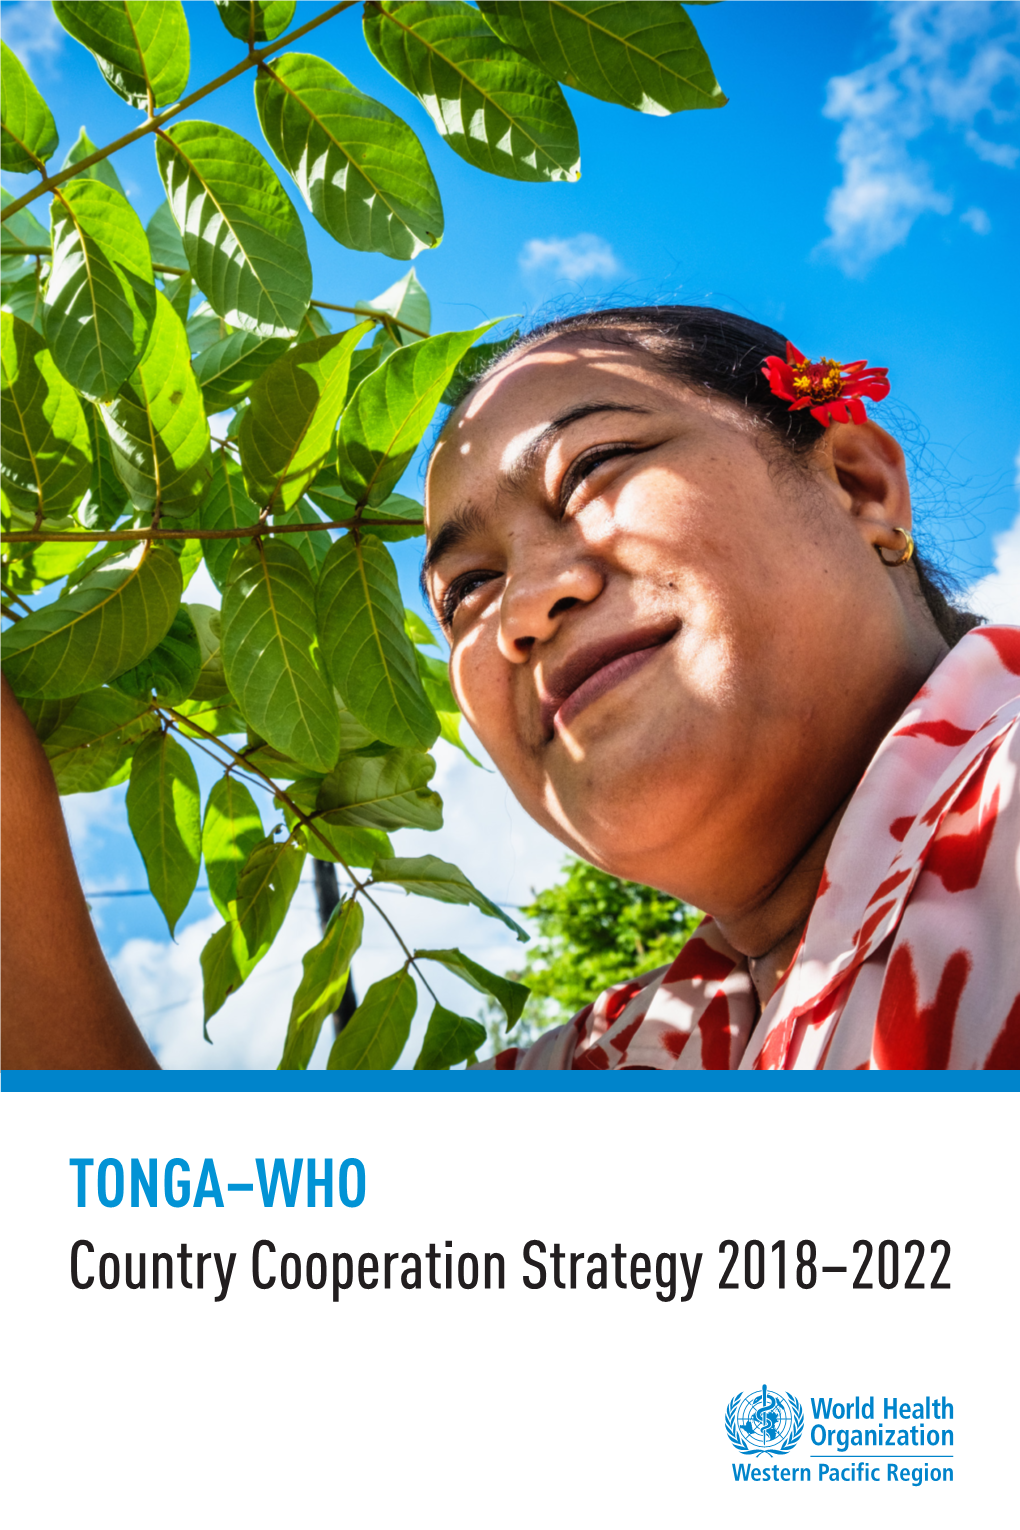 TONGA–WHO Country Cooperation Strategy 2018–2022 OVERVIEW the Kingdom of Tonga Comprises 36 Inhabited Islands Across 740 Square Kilometres in the South Pacific Ocean